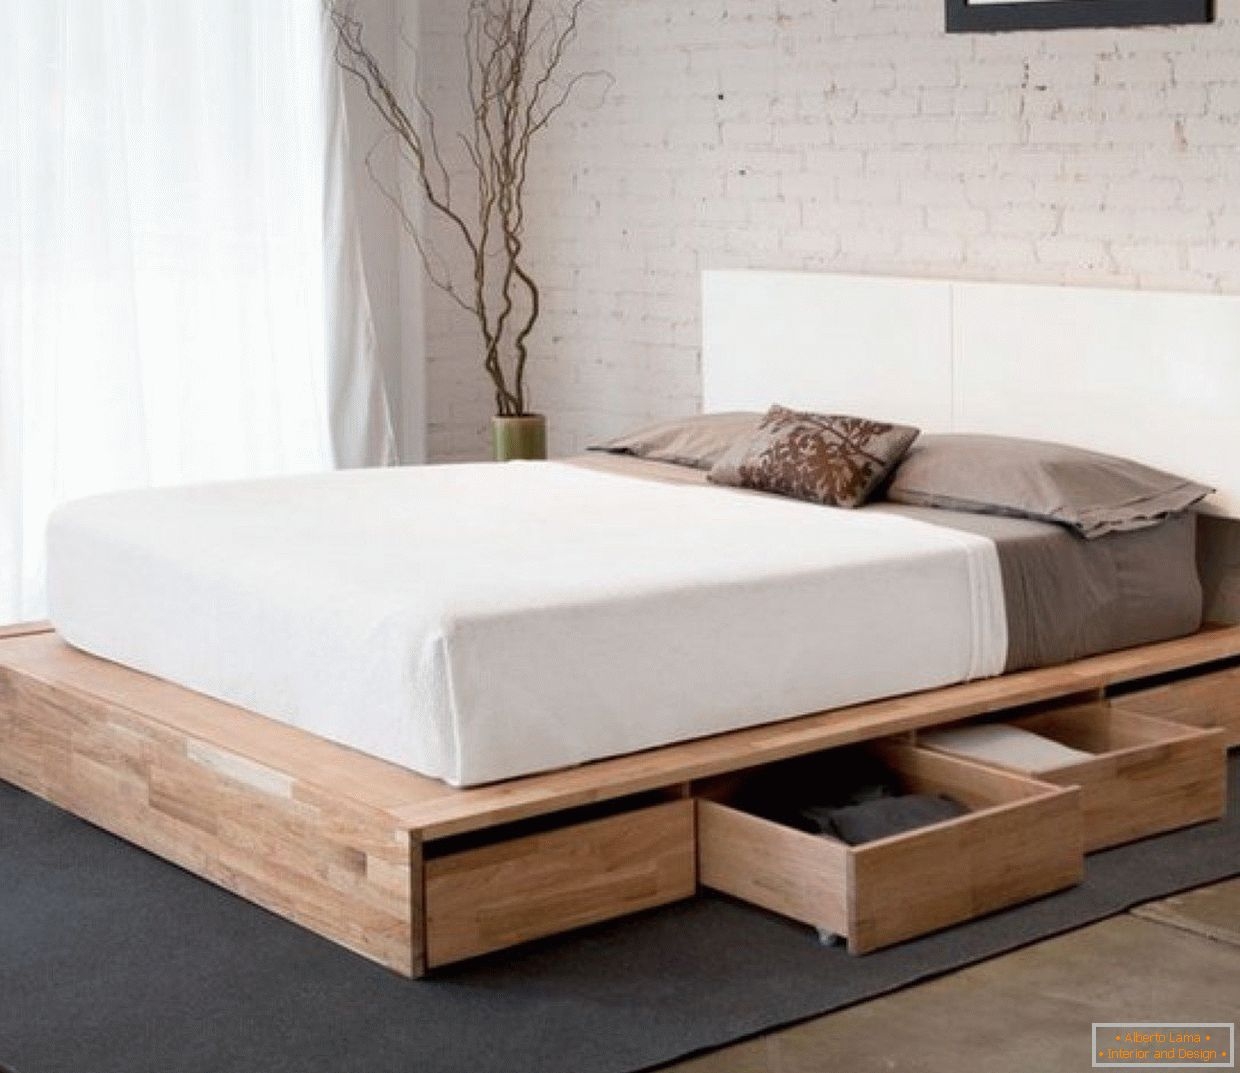 Bed With Drawers Underneath Visualhunt, King Size Bed With Storage Underneath